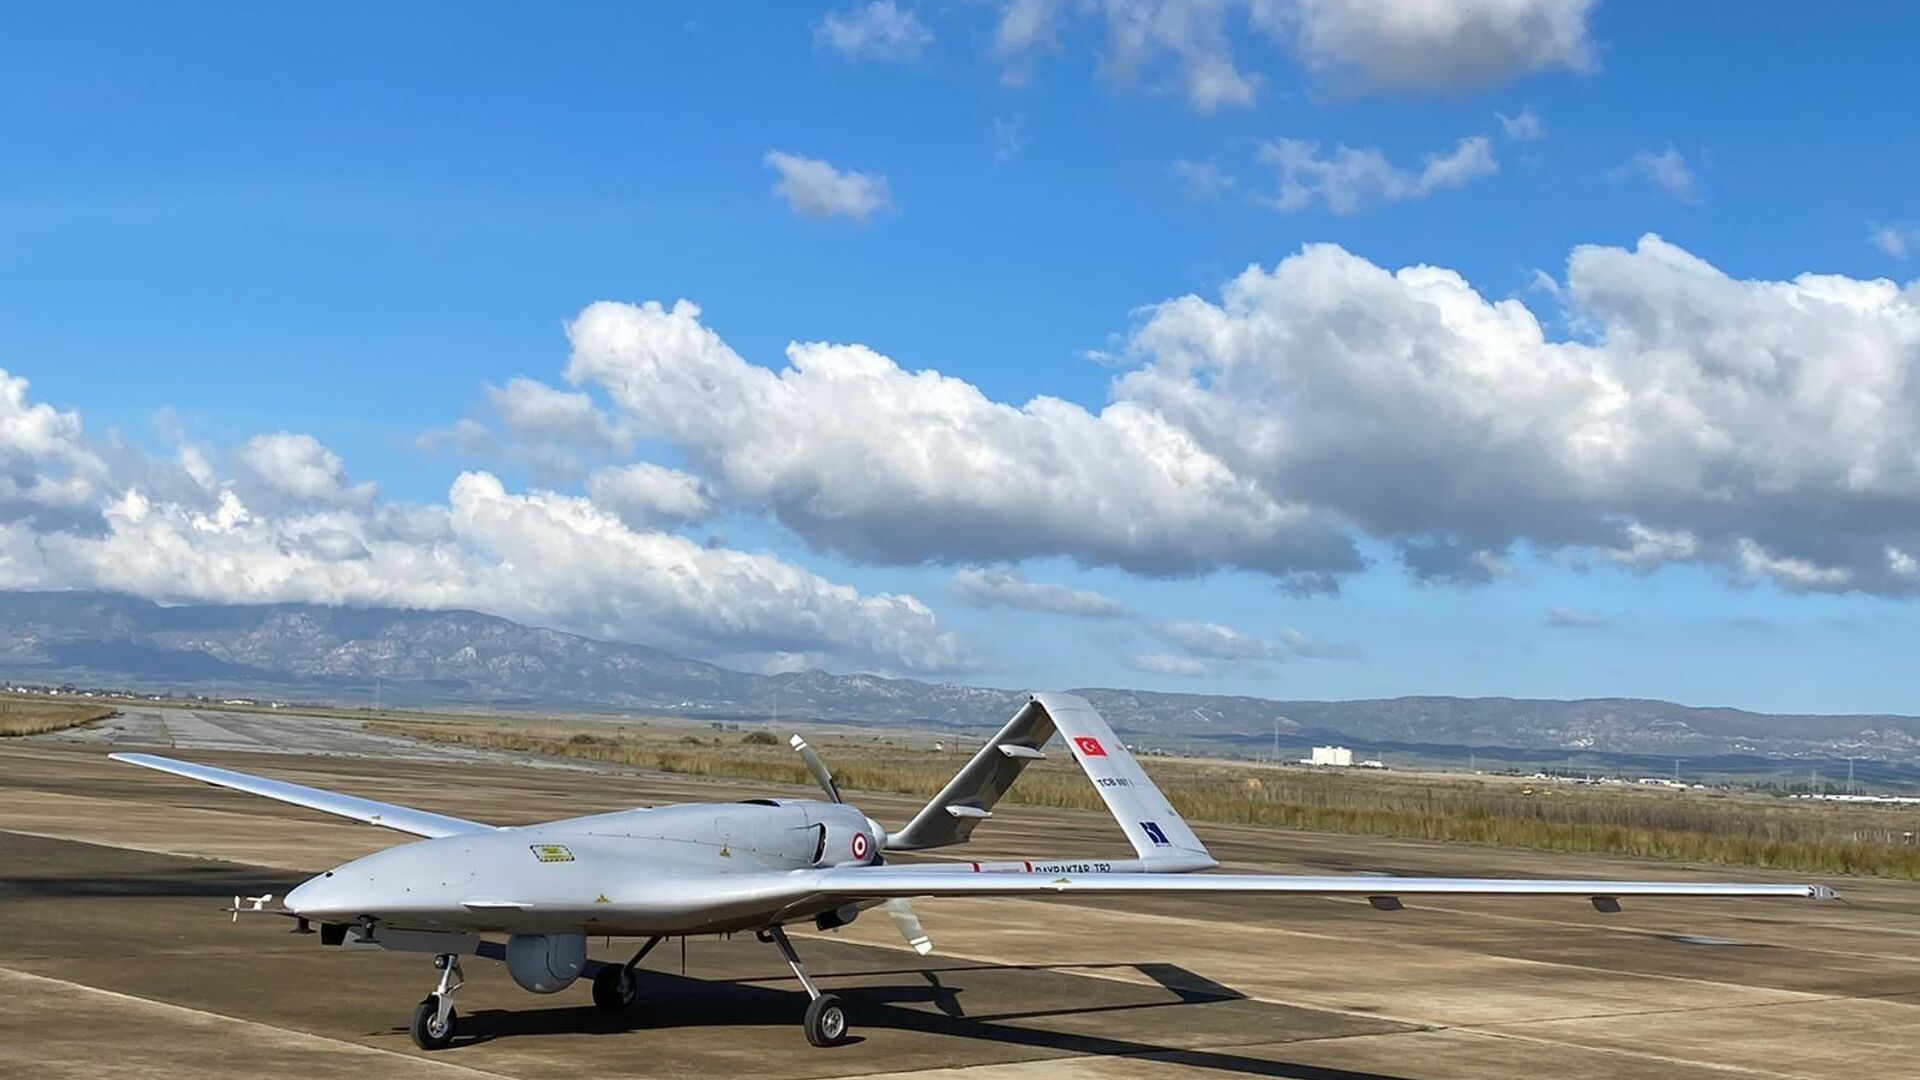 A Turkish-made Bayraktar TB2 drone is seen shortly after its landing at an airport in Gecitkala, known as Lefkoniko in Greek, in Cyprus, Monday, Dec. 16, 2019 - اسپوتنیک افغانستان  , 1920, 03.07.2022